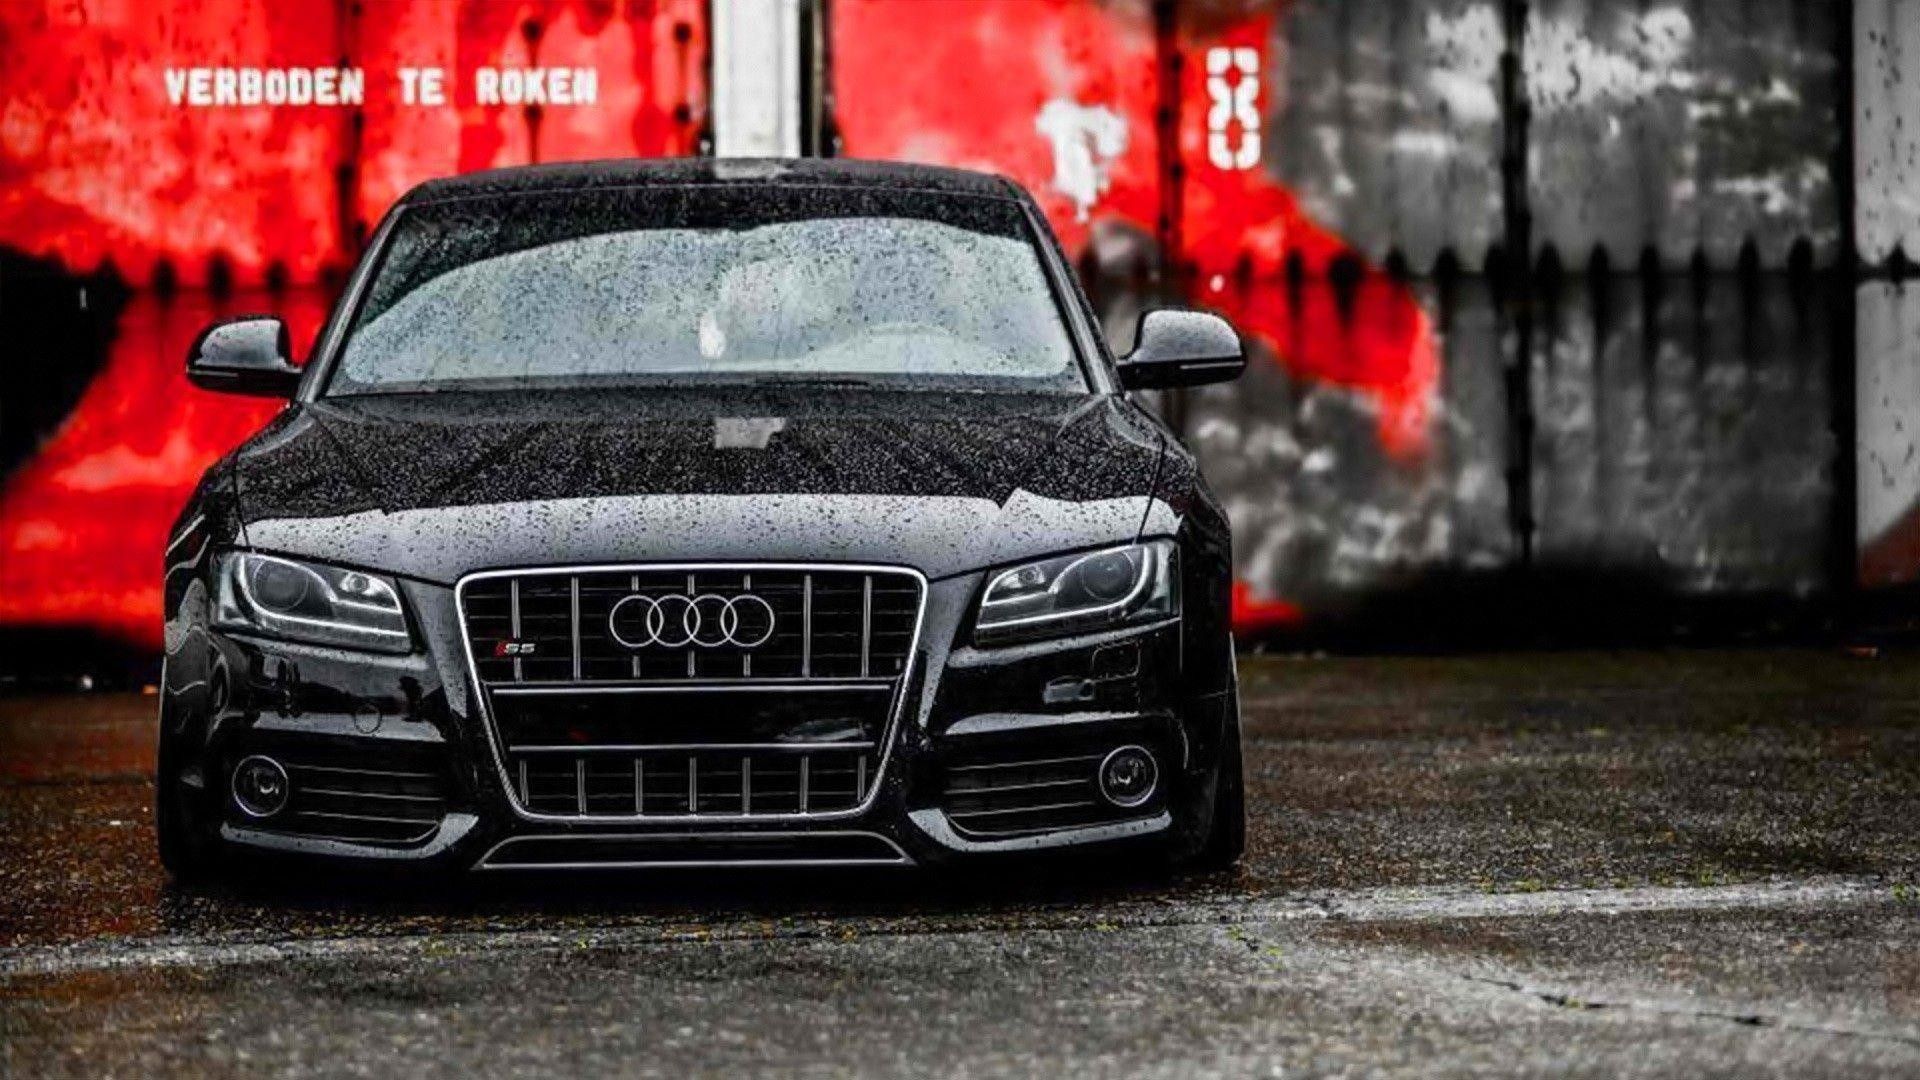 Audi RS5 Wallpaper Free Audi RS5 Background